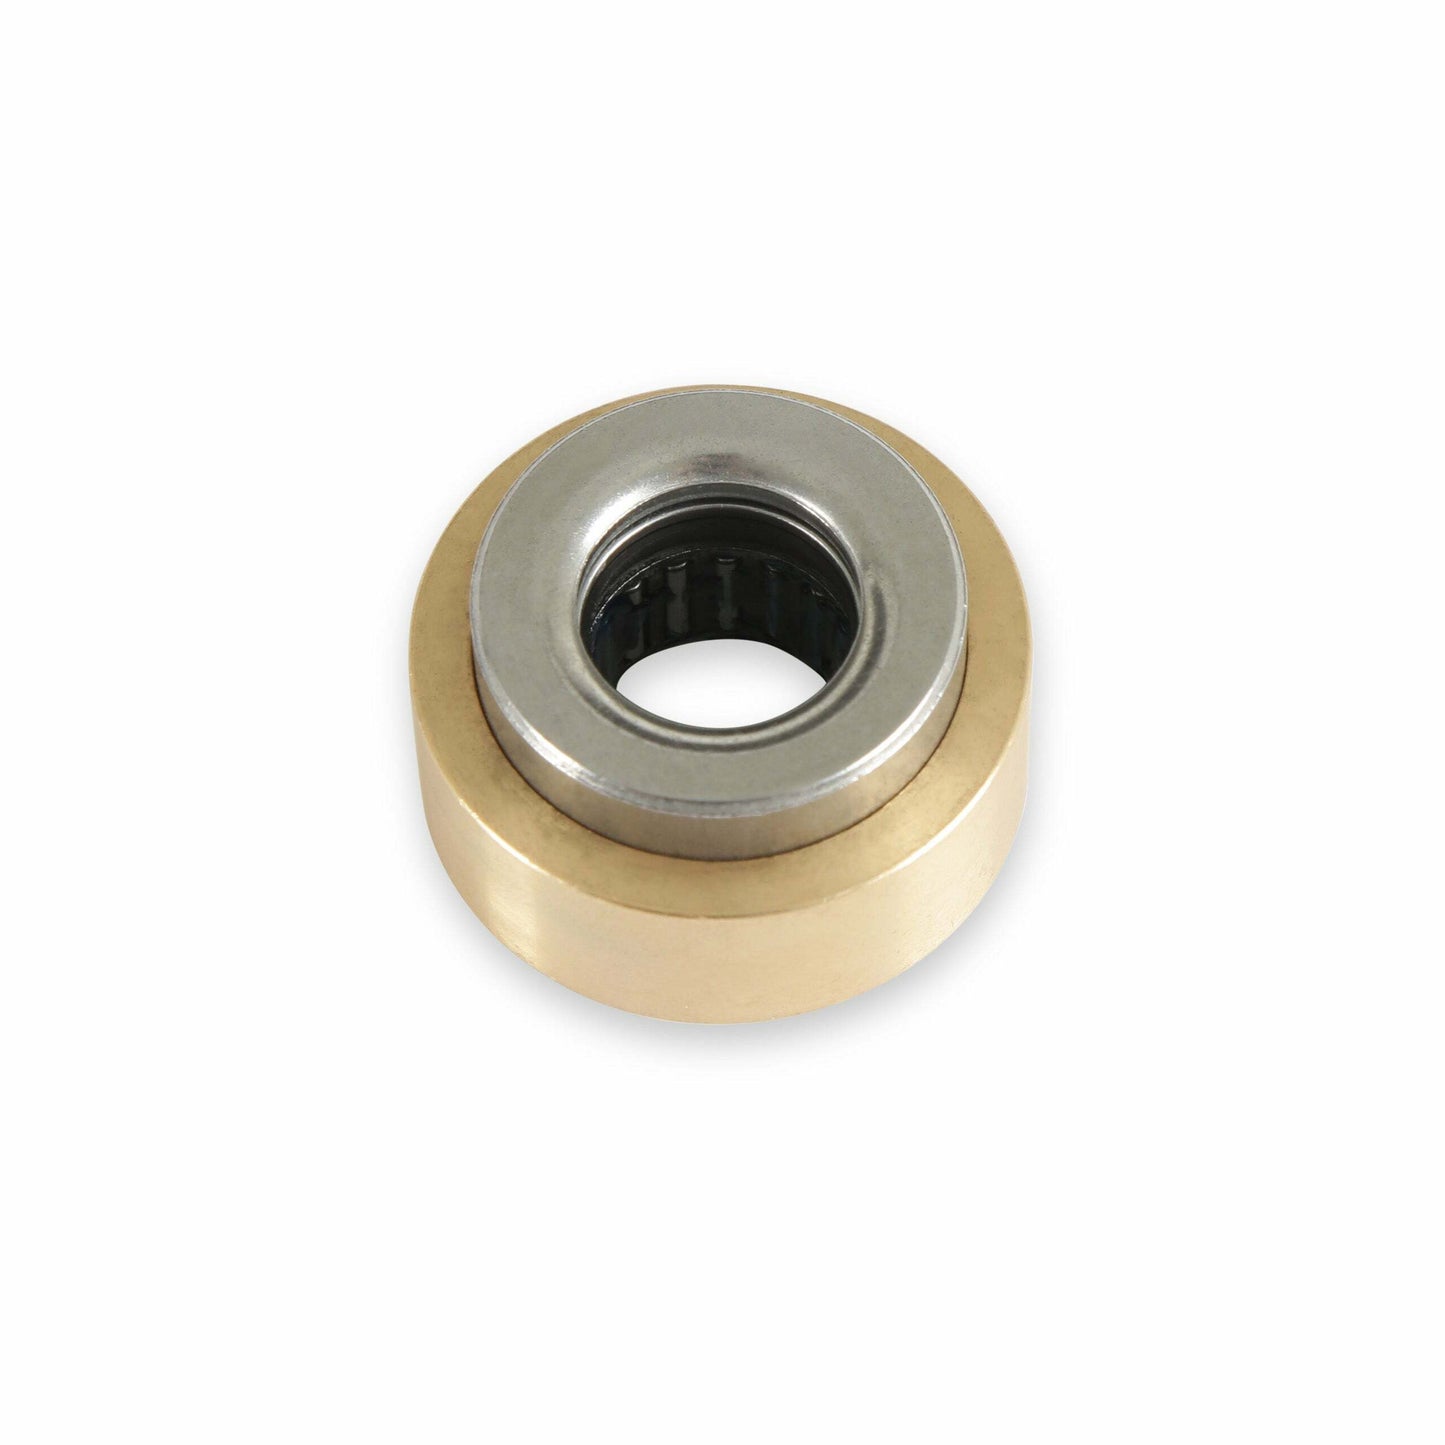 For Sbf Using Gm Transmissions .594 Pilot Bearing-Roller Type-50376